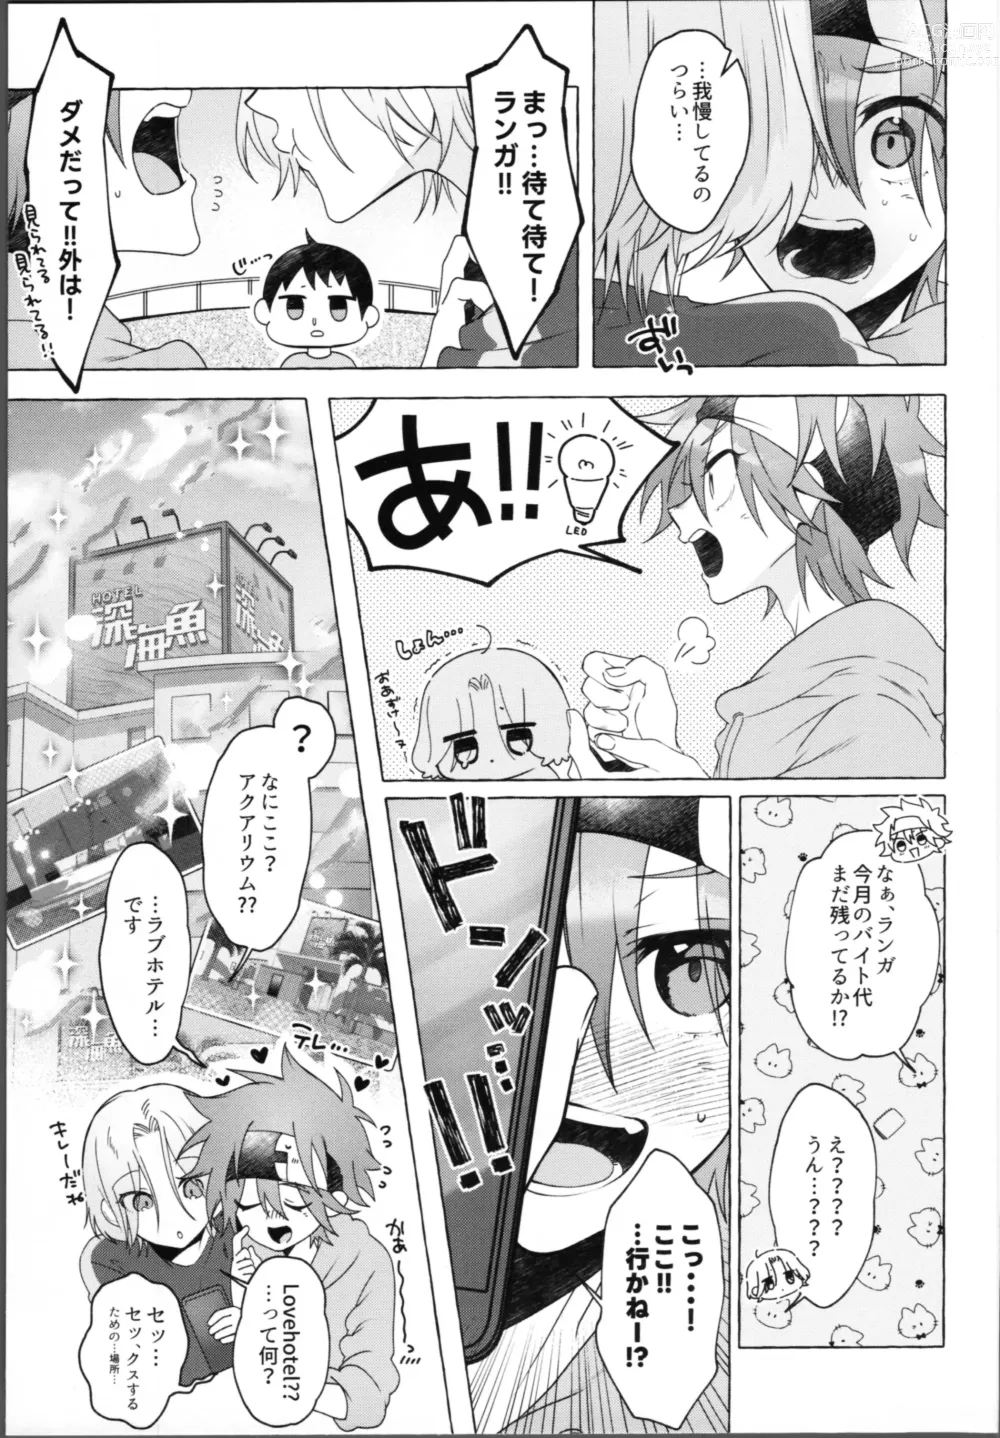 Page 6 of doujinshi Love Hotel tte Donna Toko?